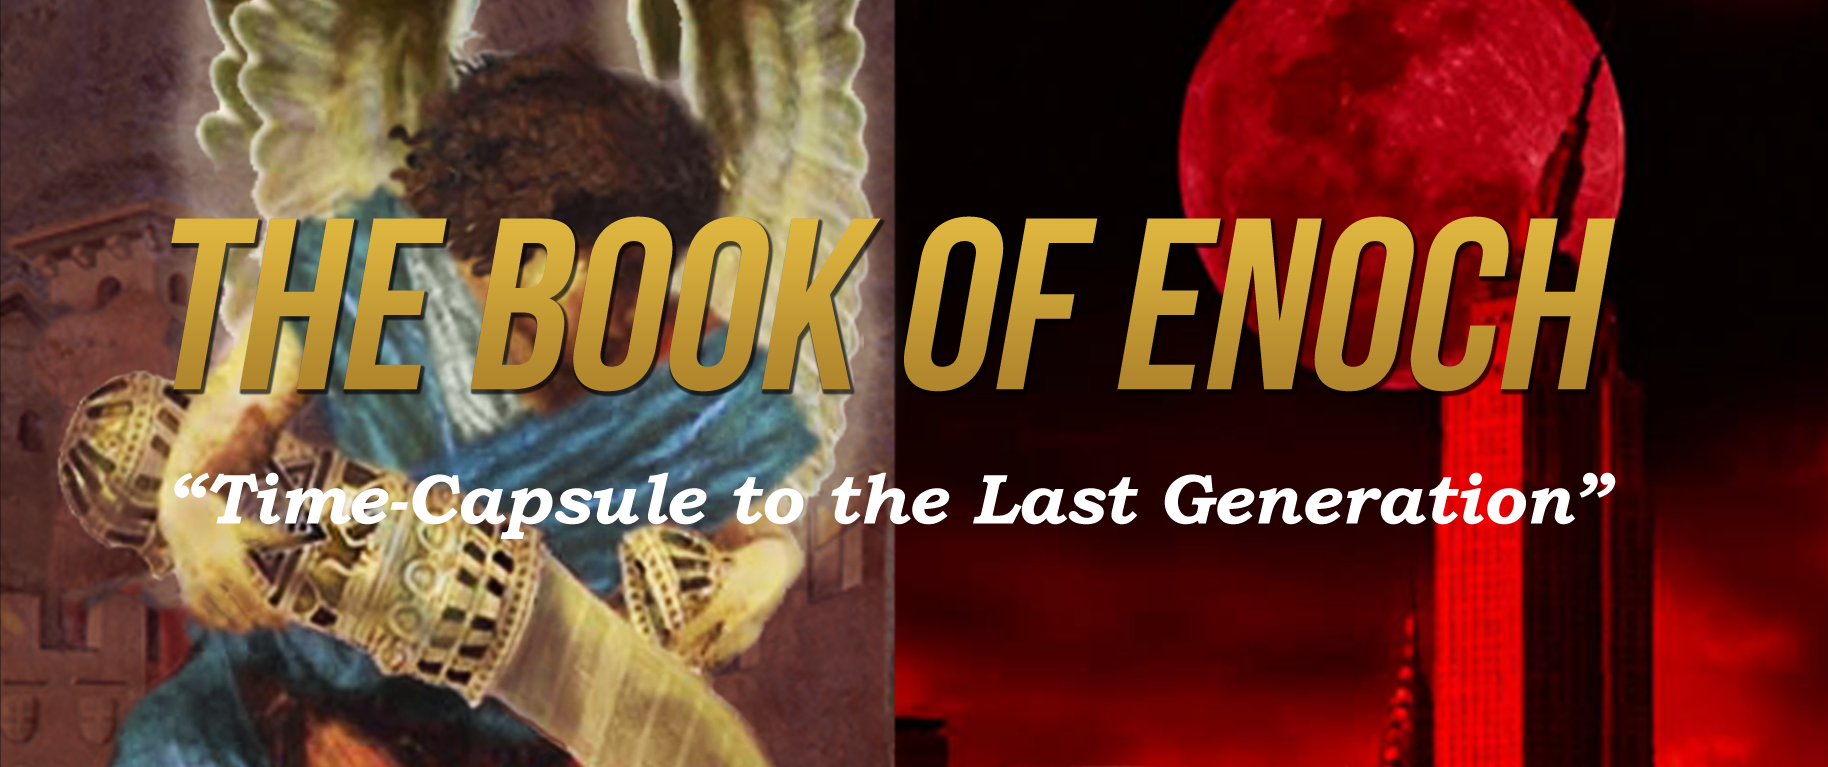 Enoch ~ Time-Capsule to the Last Geneation